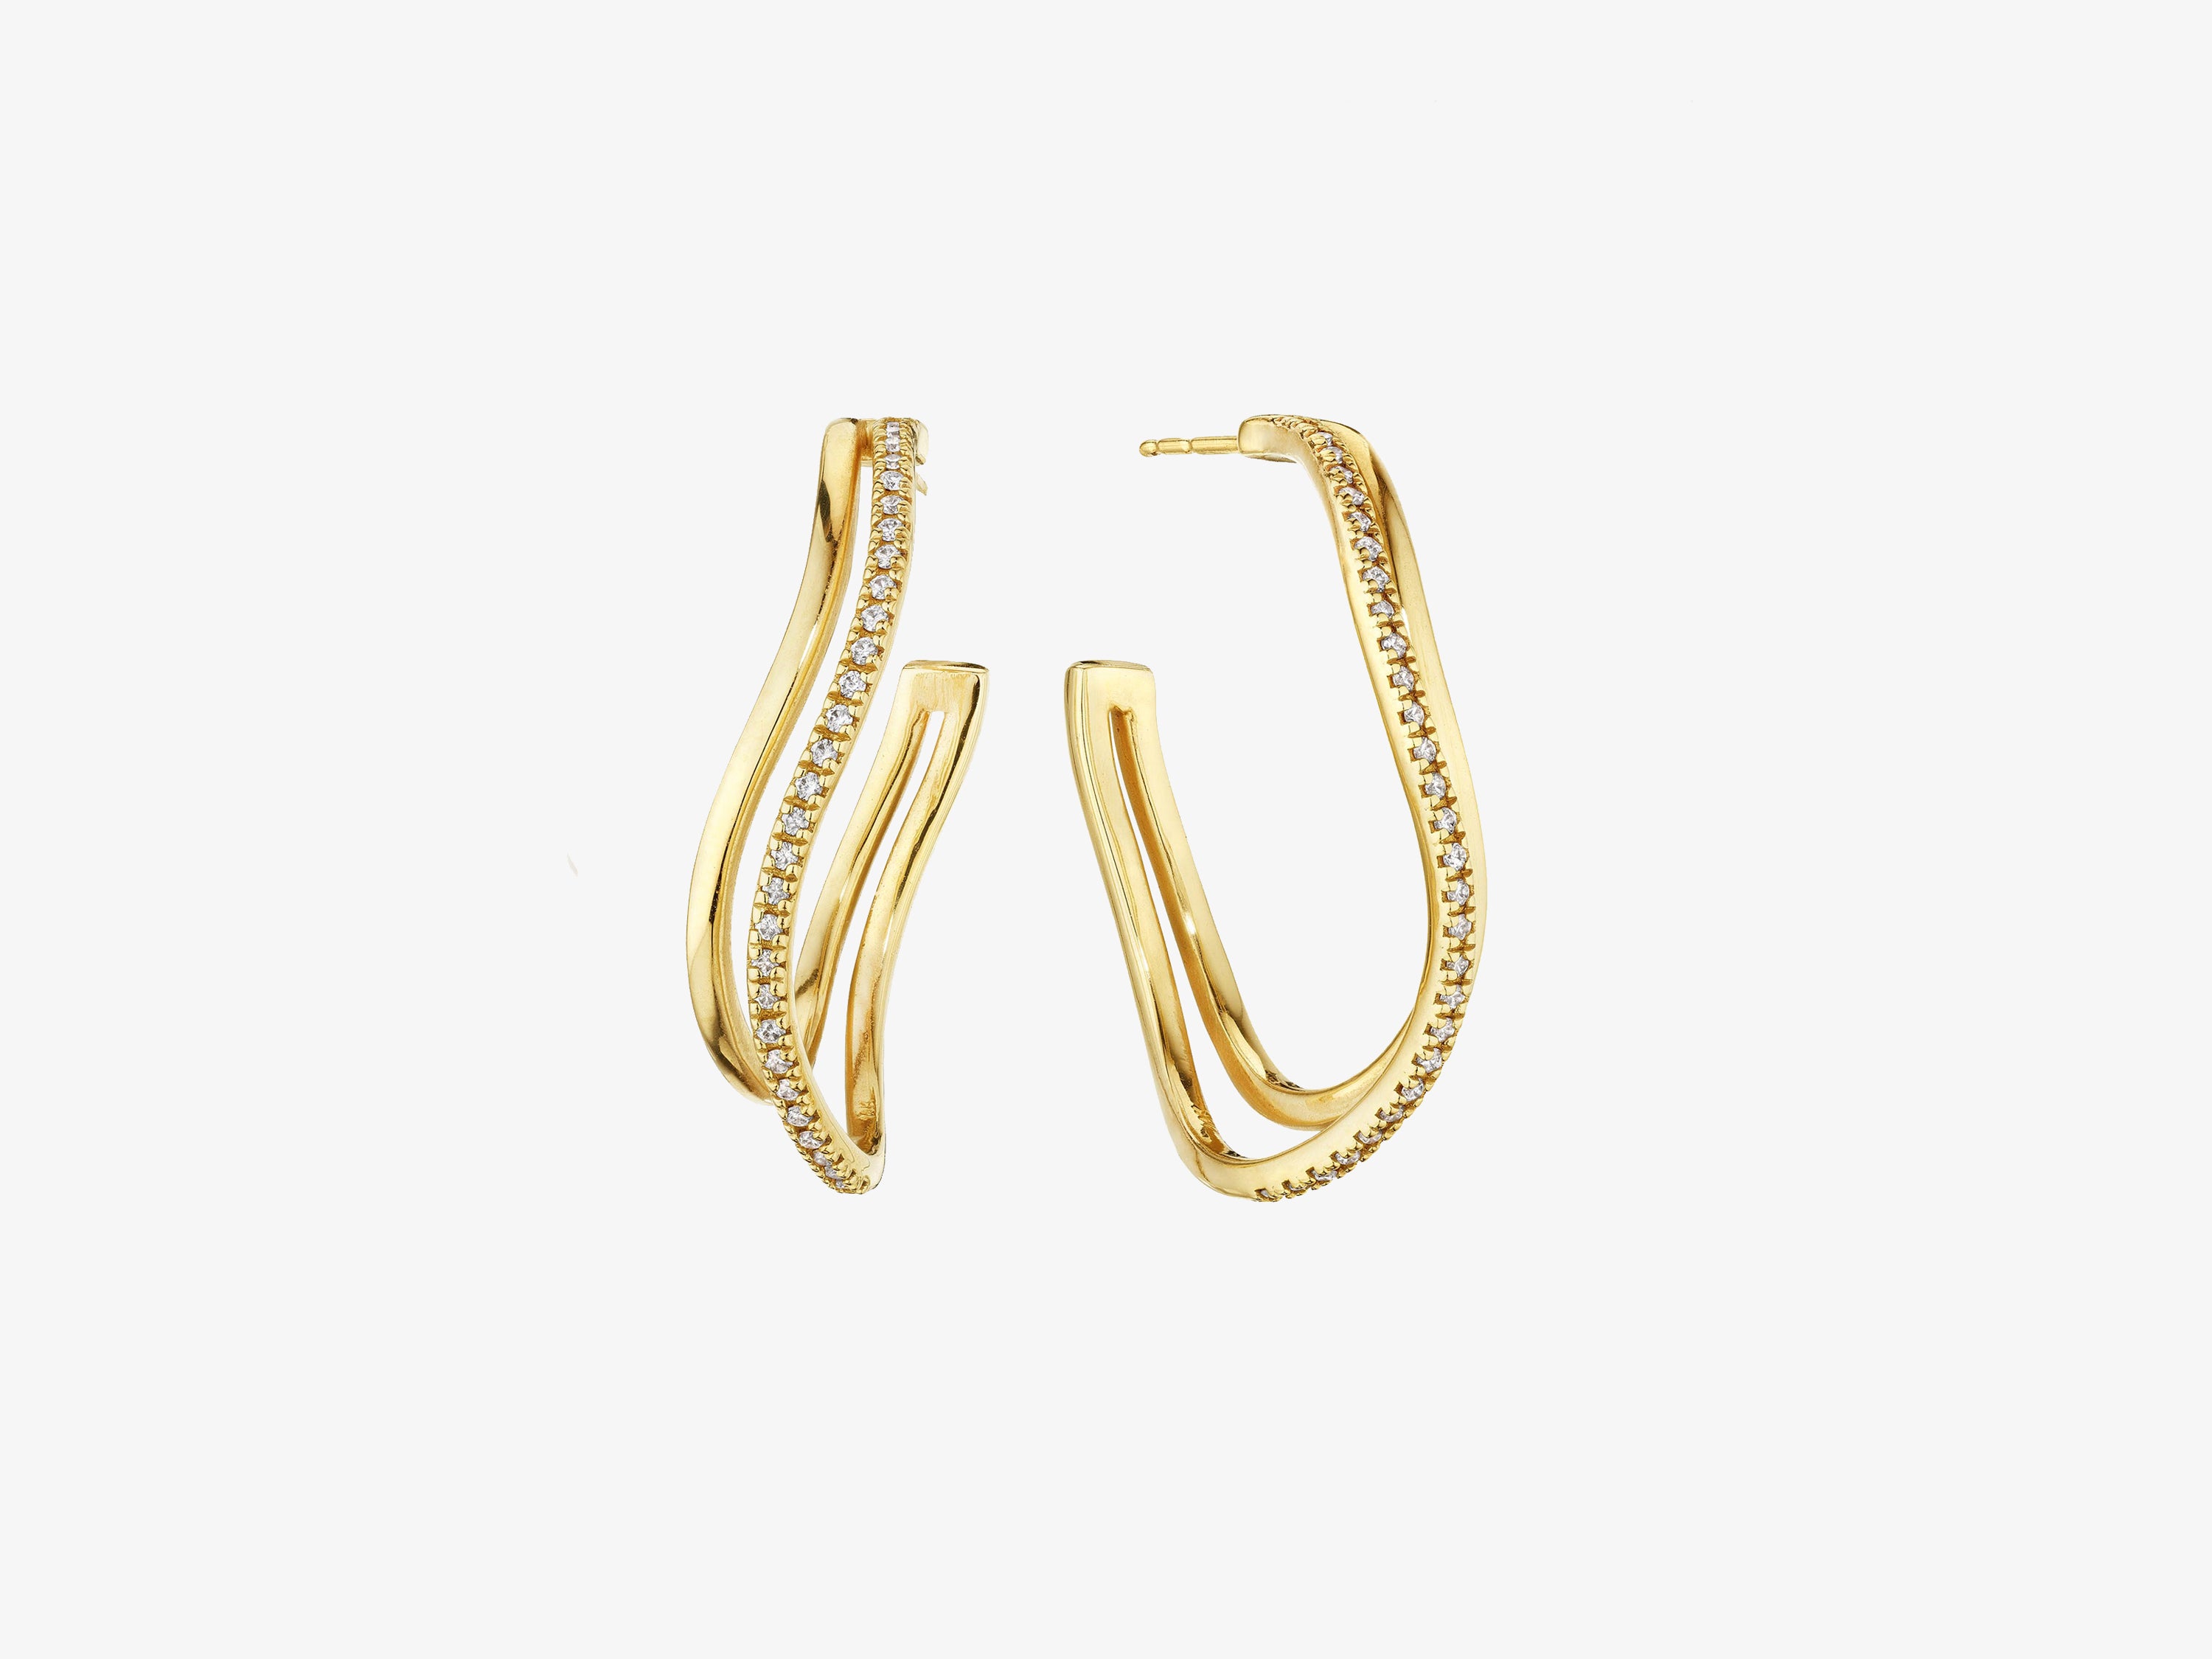 Gold and Diamond Hoops, 1 1/4“